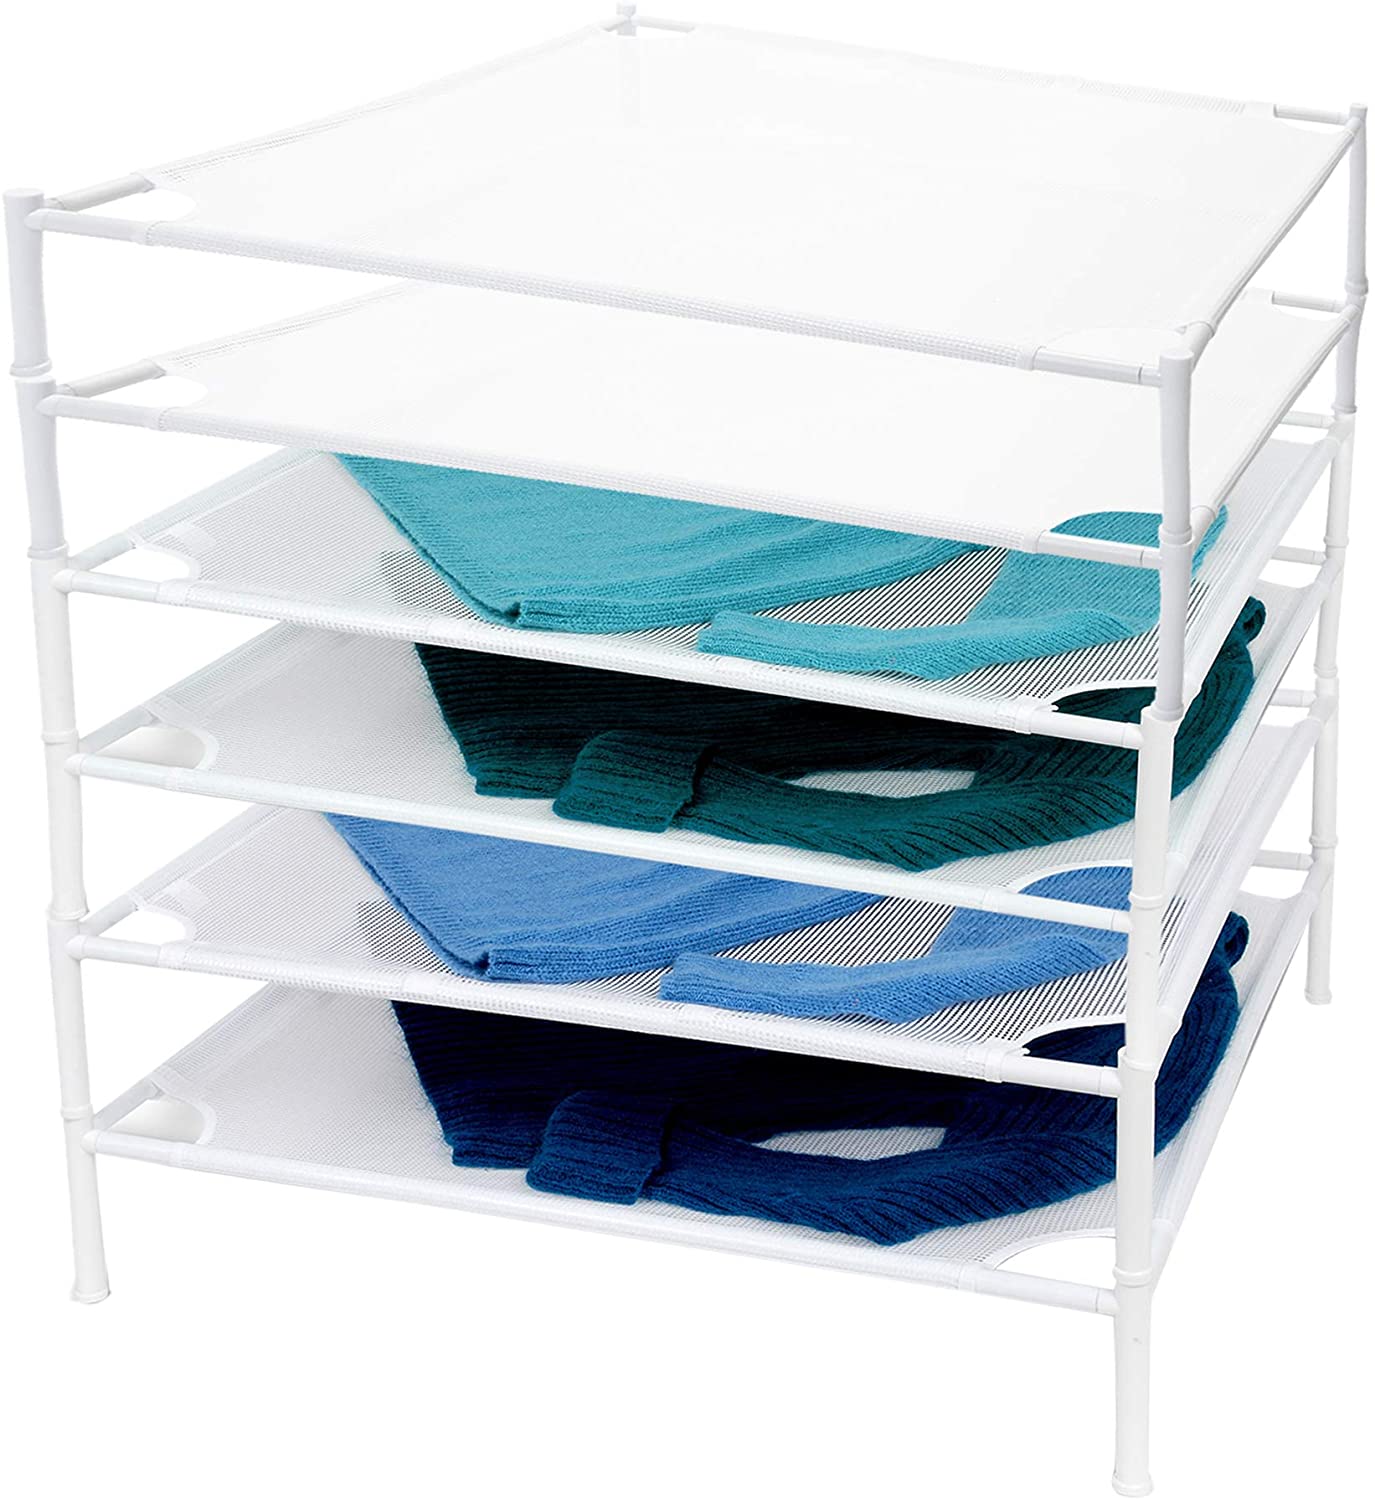 Stackable Sweater Dryer Rack with 4 Legs